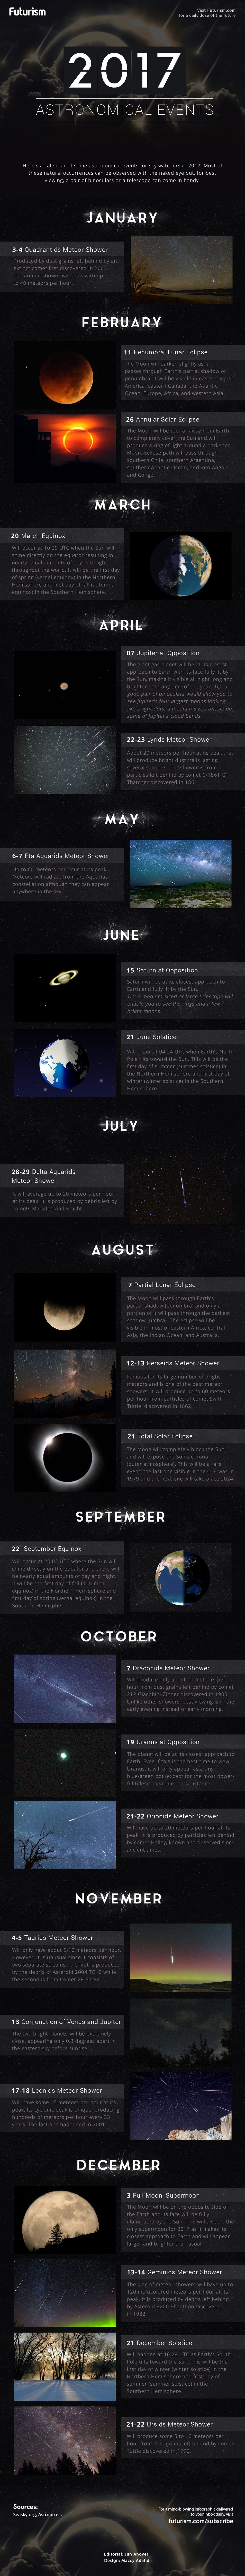 2017 Astronomical Events Check out our calendar of some of 2017s astronomical events for sky watchers. Most of these natural